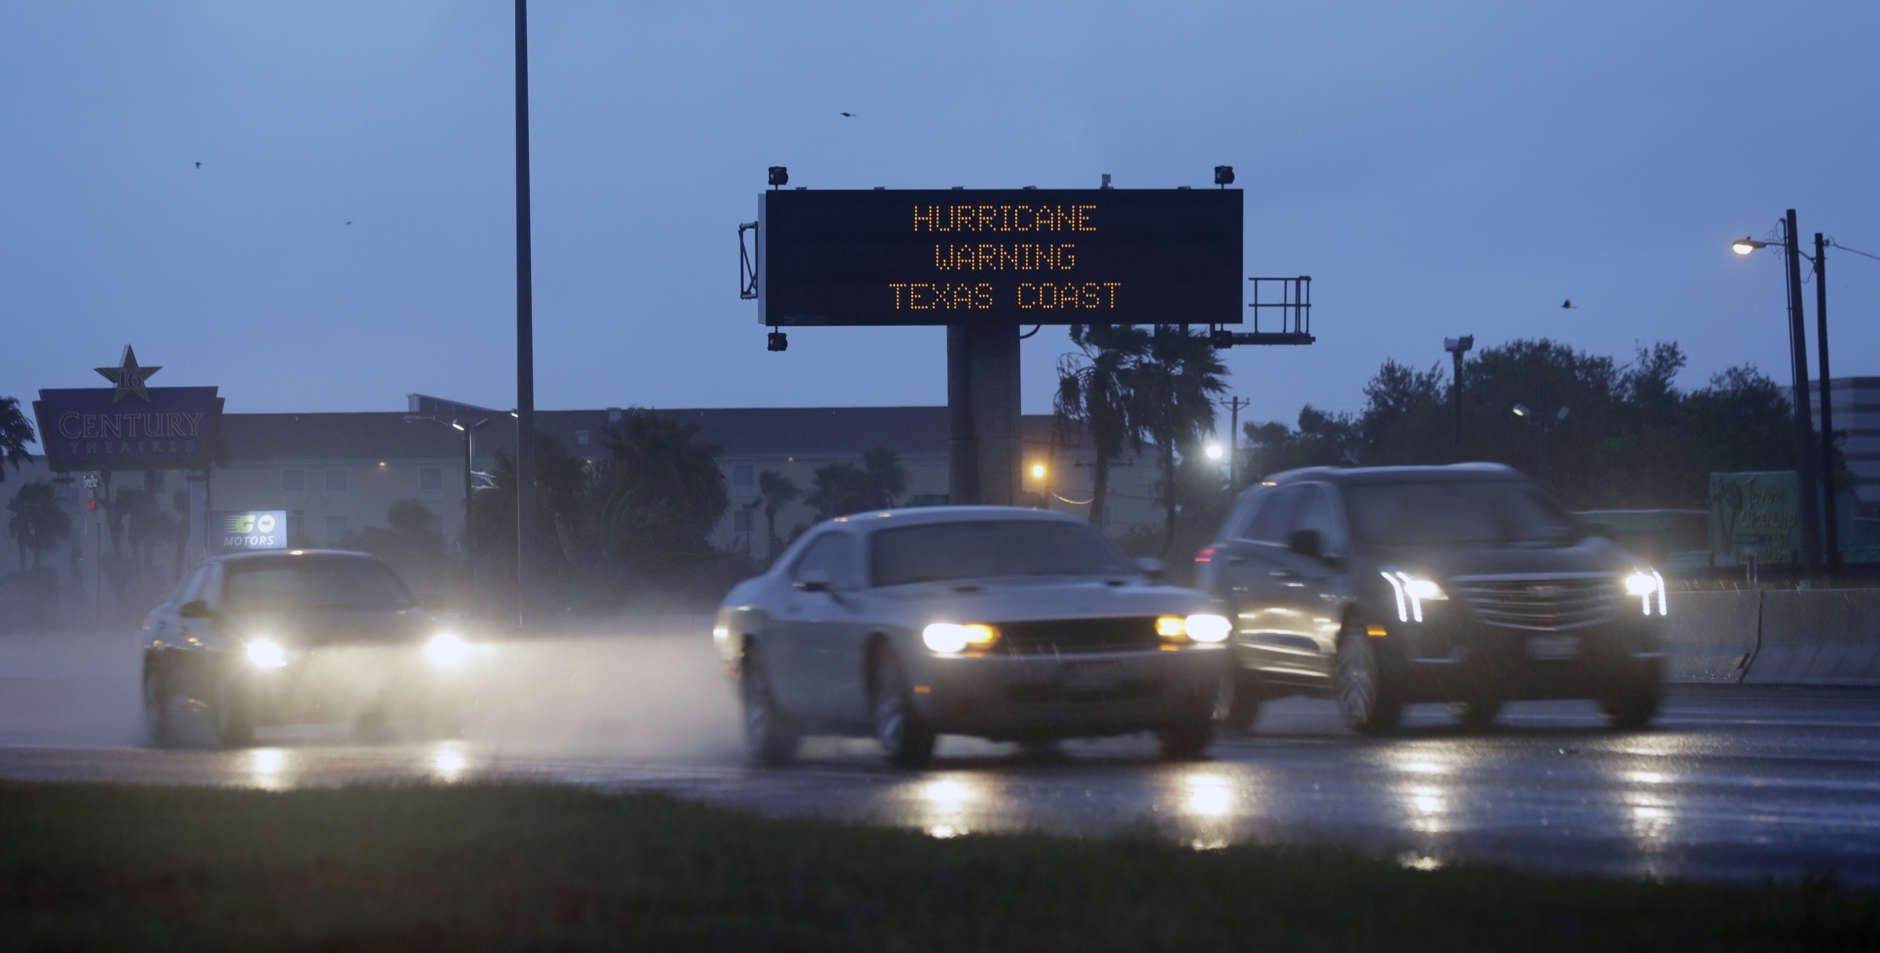 Motorists pass a warning sign as Hurricane Harvey approaches the Gulf Coast area Friday, Aug. 25, 2017, in Corpus Christi, Texas.  The slow-moving hurricane could be the fiercest such storm to hit the United States in almost a dozen years. Forecasters labeled Harvey a "life-threatening storm" that posed a "grave risk" as millions of people braced for a prolonged battering. (AP Photo/Eric Gay)